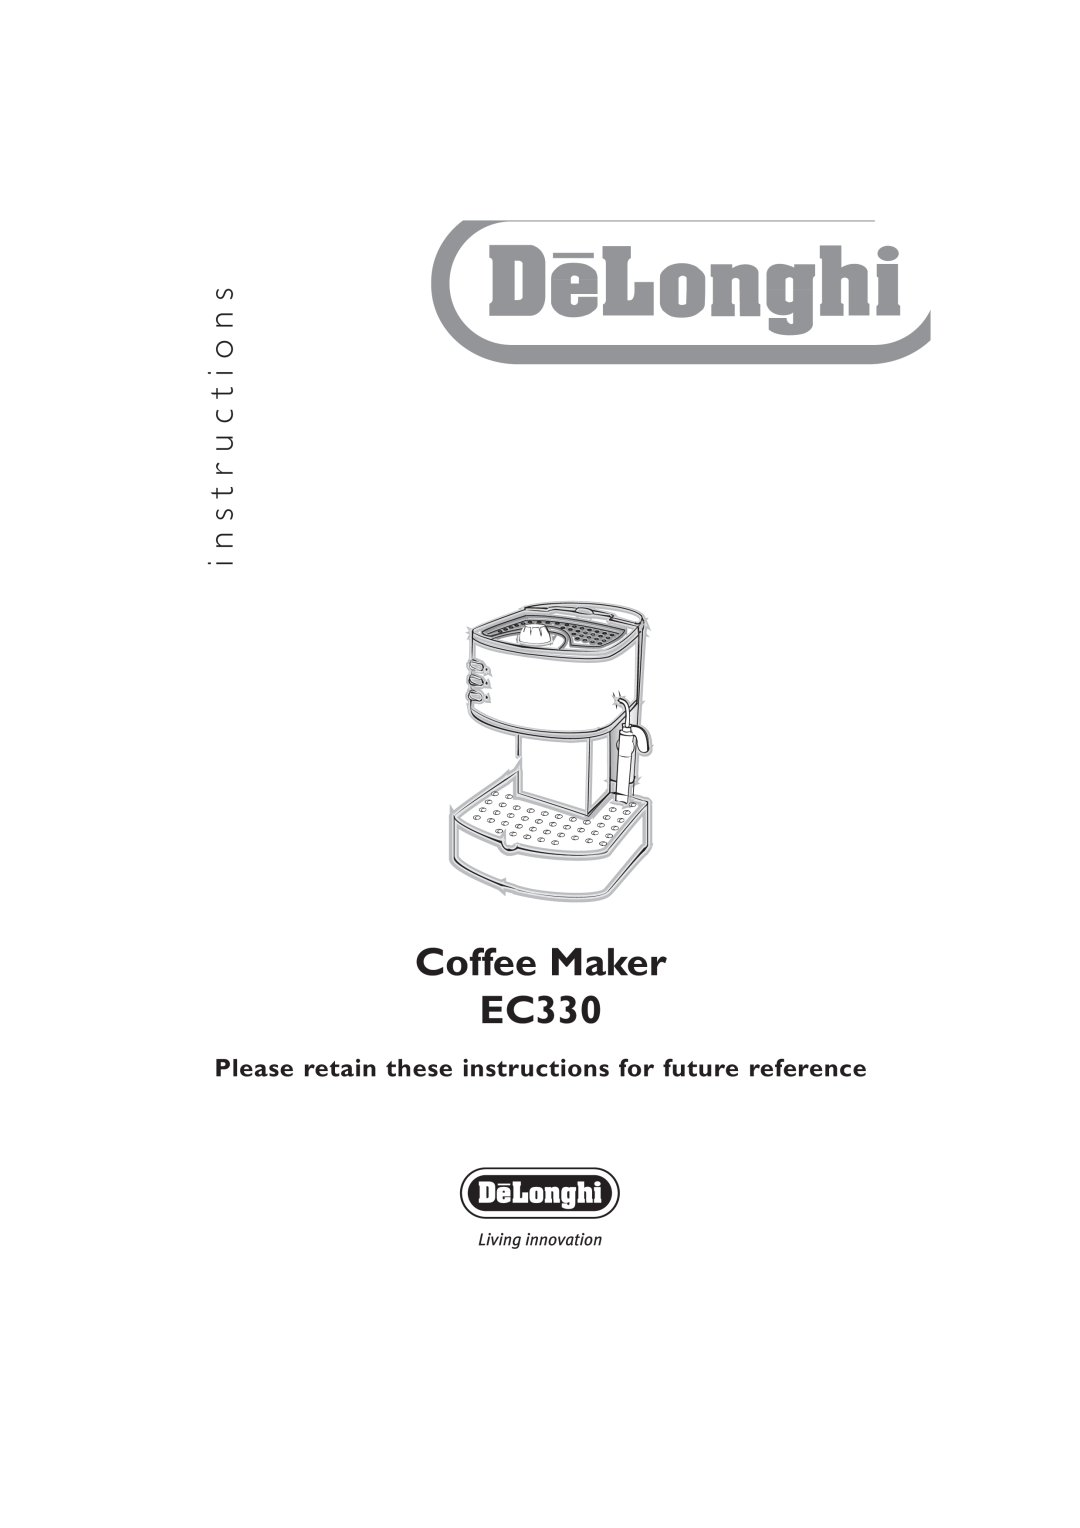 DeLonghi manual Coffee Maker EC330, i n s t r u c t i o n s, Please retain these instructions for future reference 